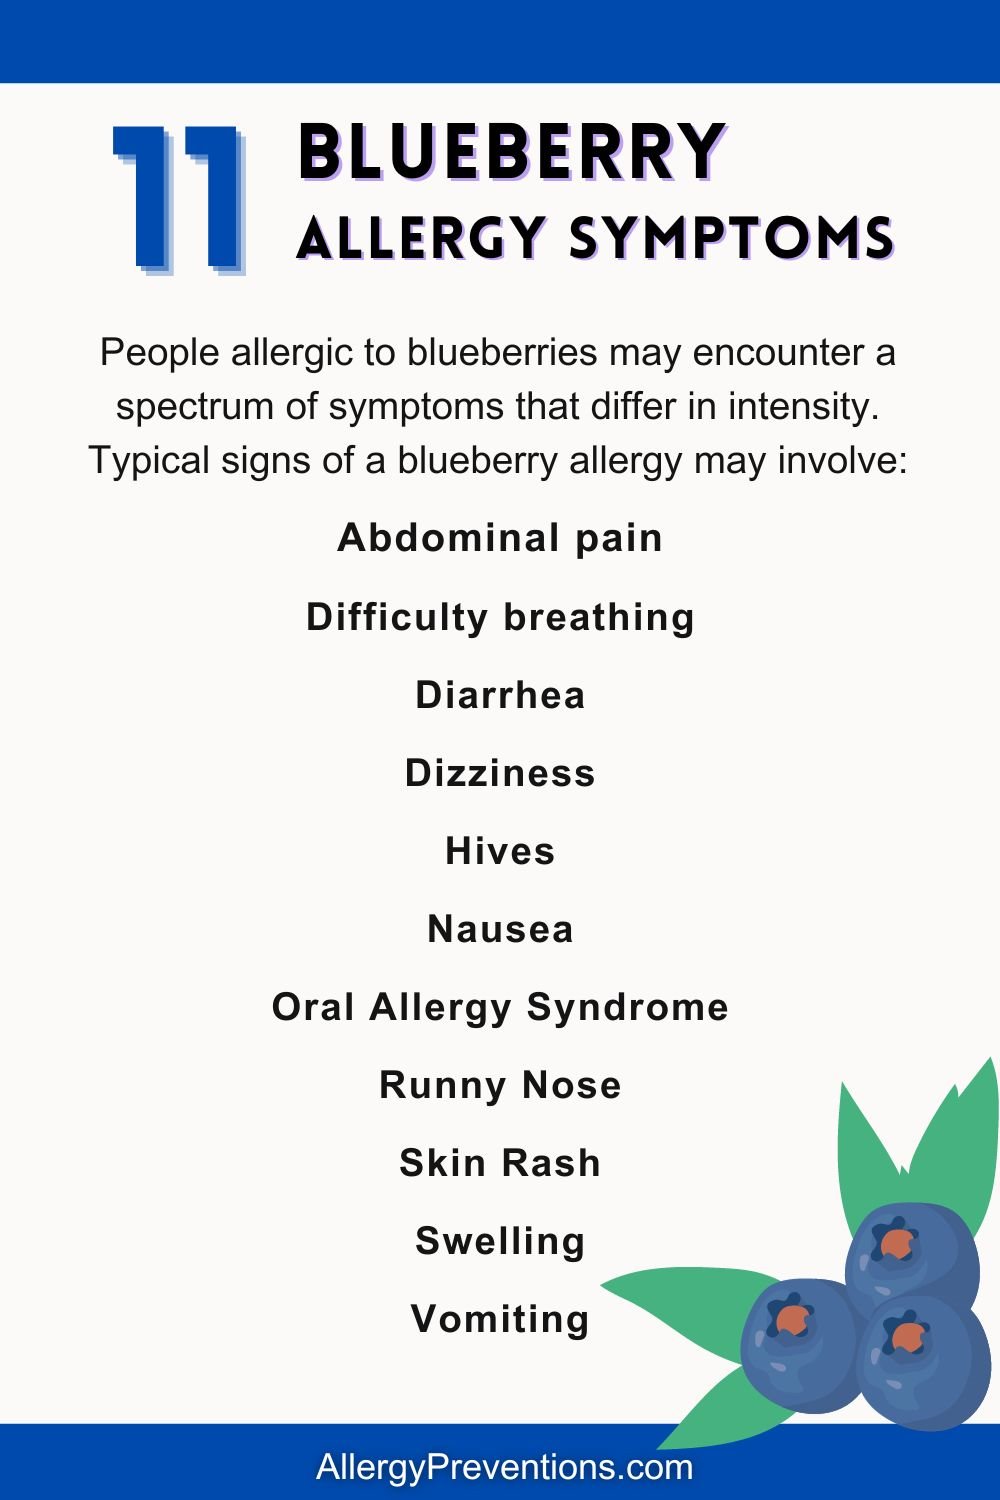 Blueberry allergy symptoms infographic. People allergic to blueberries may encounter a spectrum of symptoms that differ in intensity. Typical signs of a blueberry allergy may involve: Abdominal pain, Difficulty breathing, Diarrhea, Dizziness, Hives, Nausea, Oral Allergy Syndrome, Runny Nose, Skin, Rash, Swelling, Vomiting.